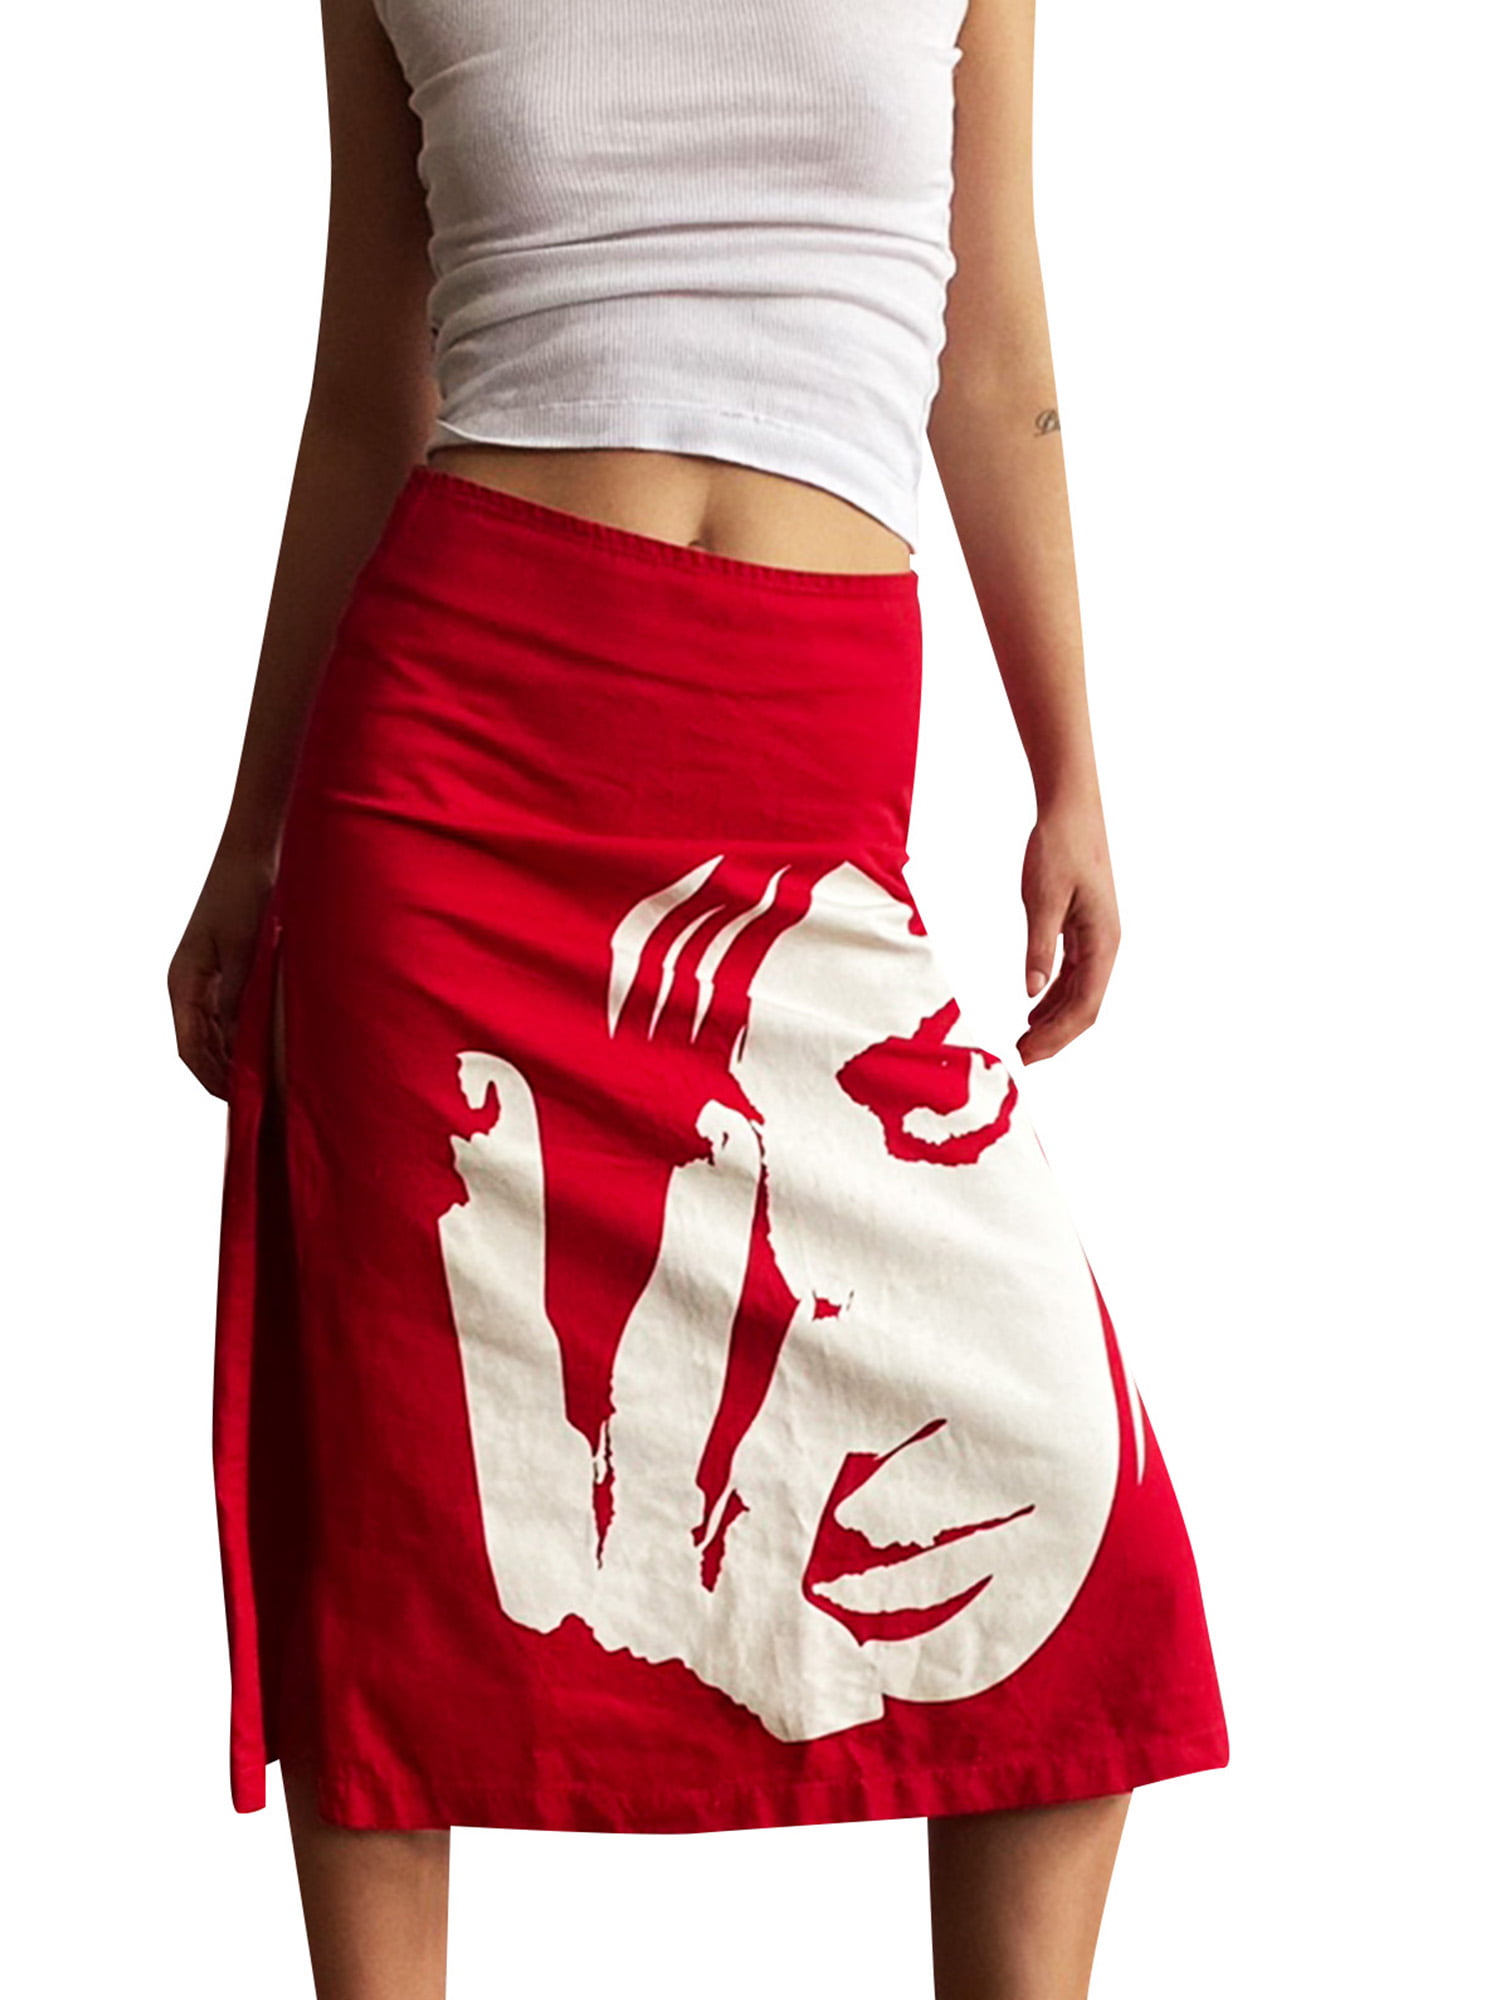 Y2K Just for Wraps Floral Midi Skirt Women's M